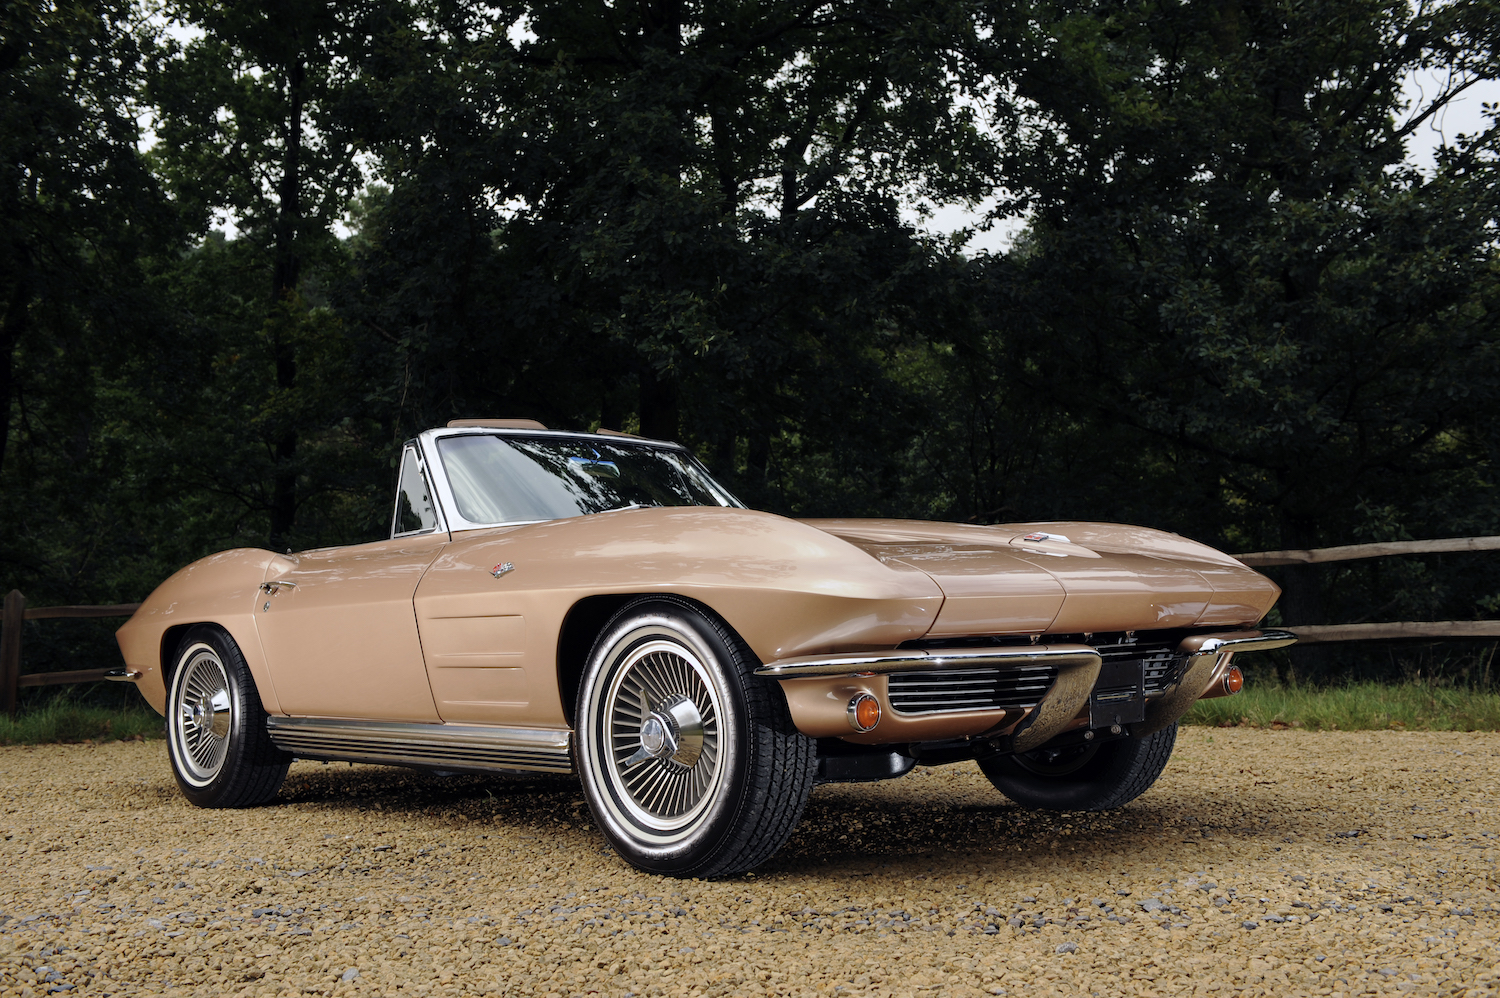 This is a 1964 Chevrolet Corvette at a museum. The Stingray Corvette Z06 made legendary small-block power. | National Motor Museum/Heritage Images/Getty Images